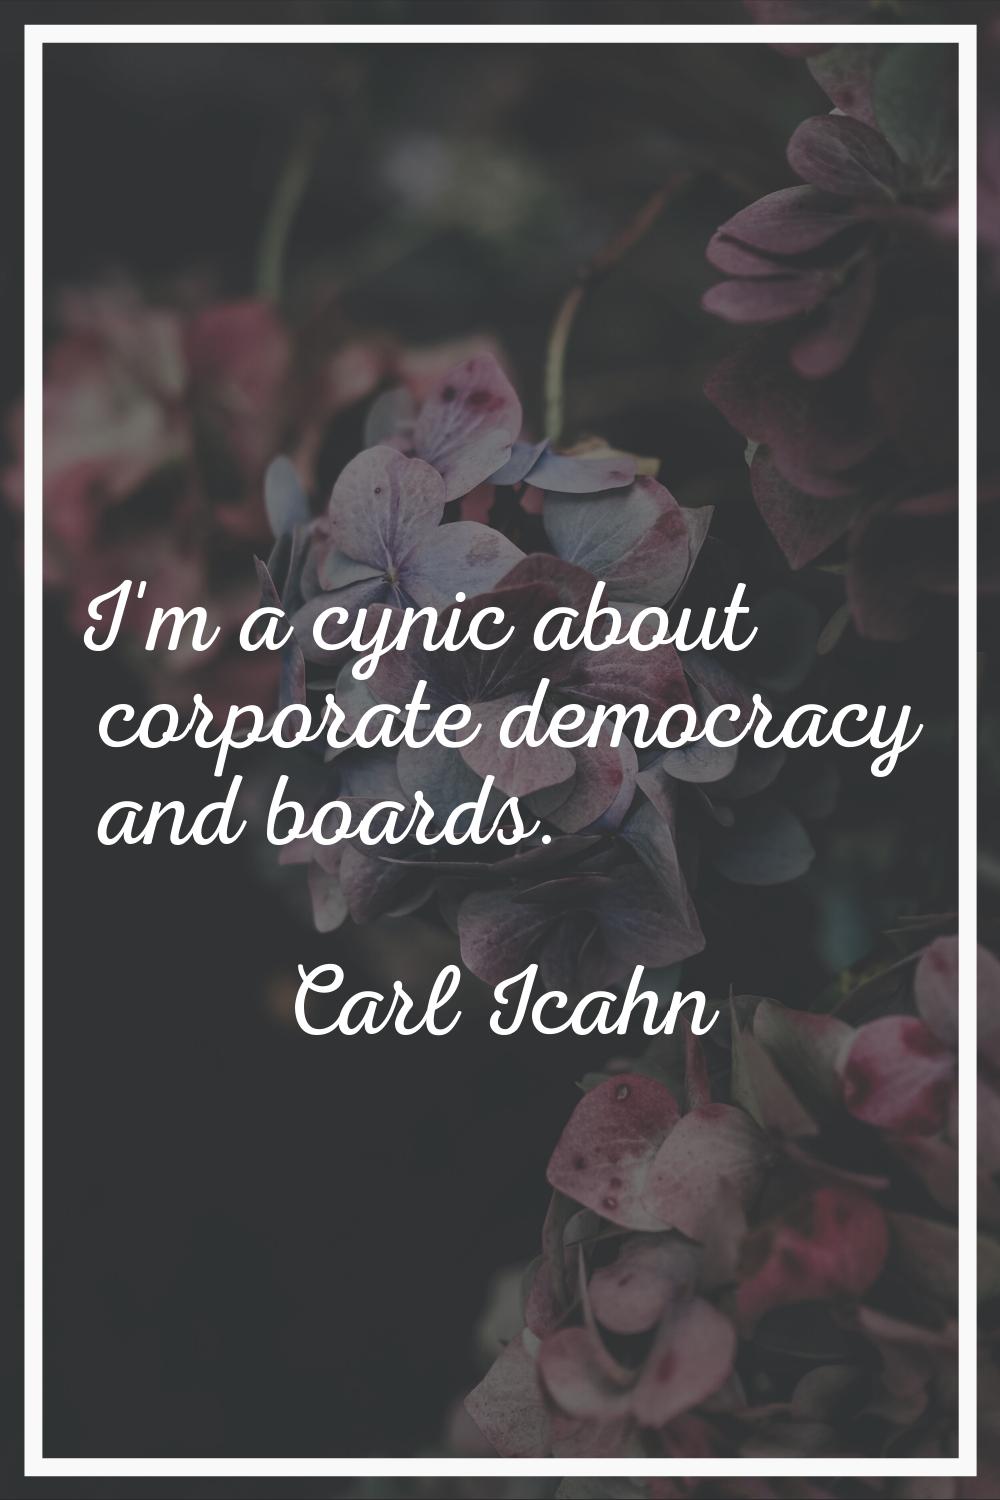 I'm a cynic about corporate democracy and boards.